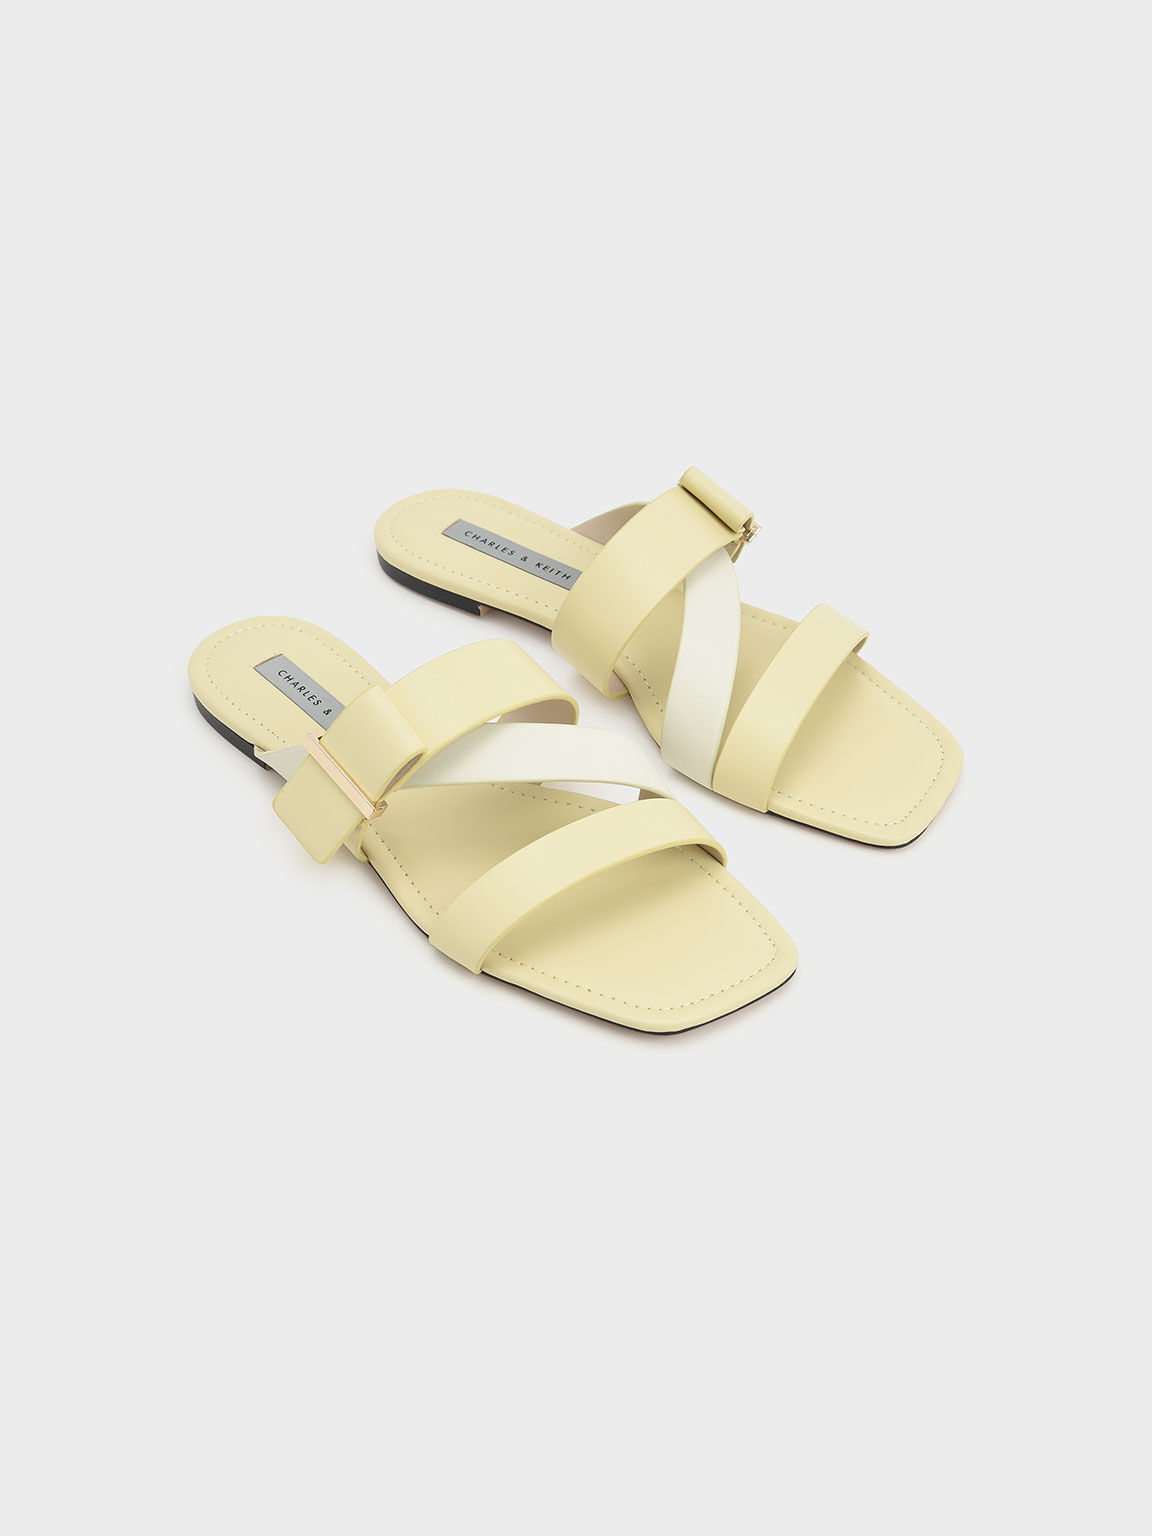 Sandal Slide Metallic Accent Strappy Square-Toe, Yellow, hi-res